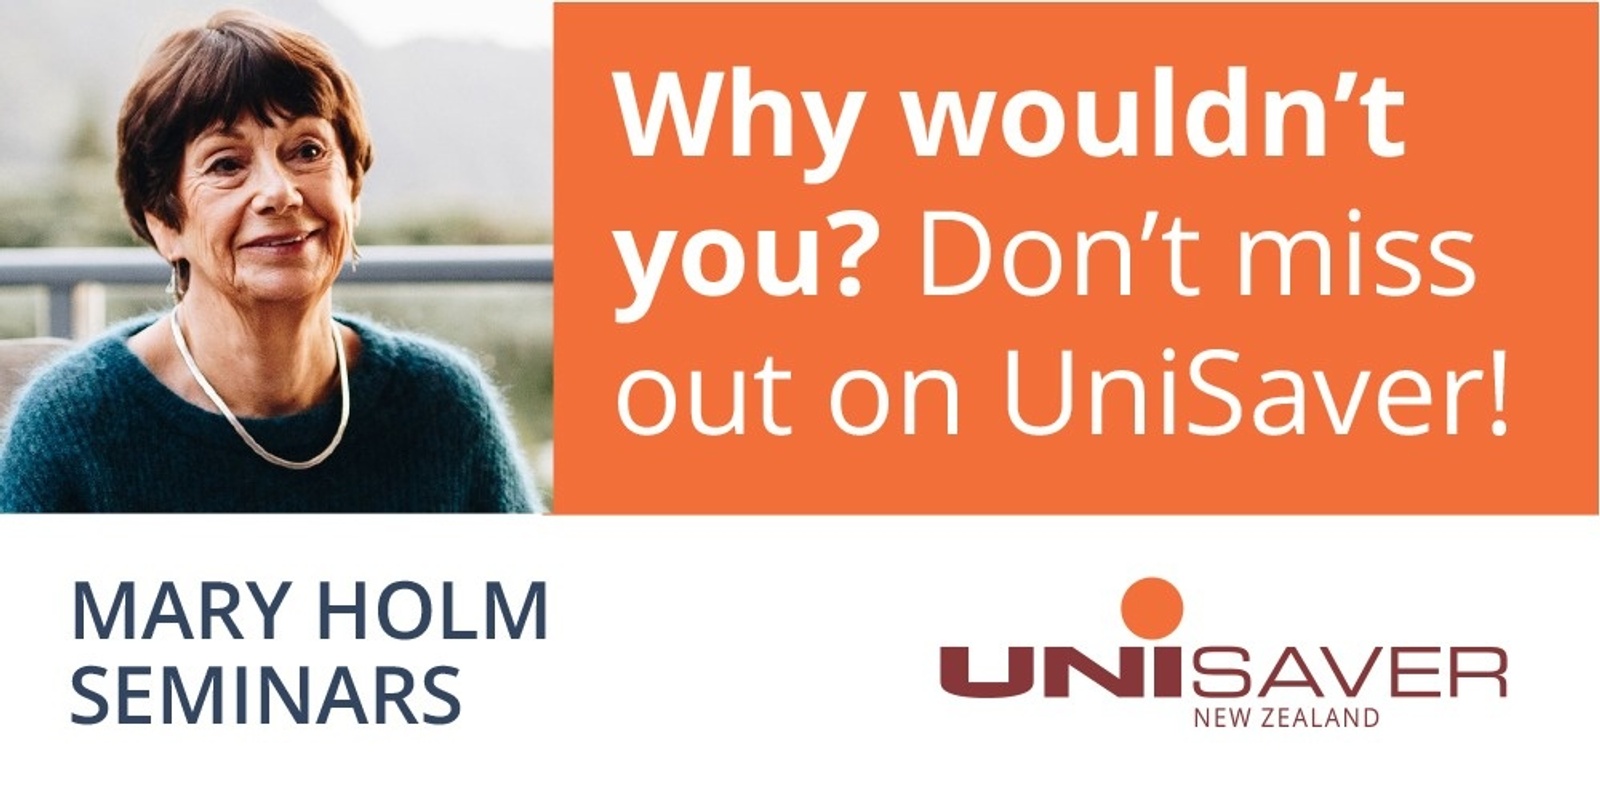 Banner image for Why wouldn't you? Don't miss out on Unisaver!